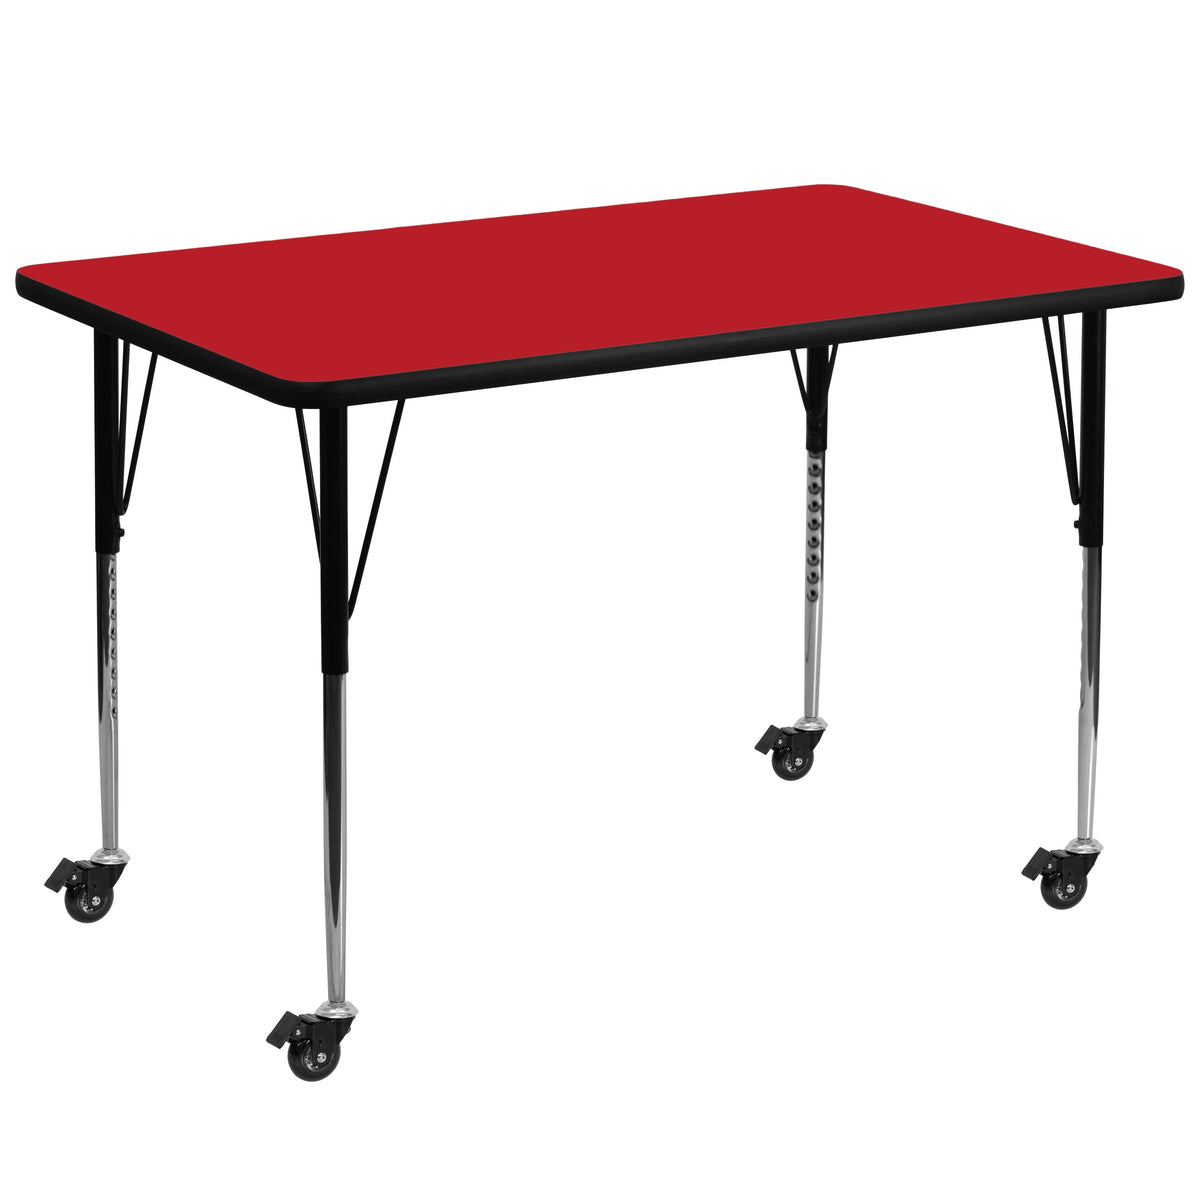 Red |#| Mobile 36inchW x 72inchL Rectangular Red HP Laminate Adjustable Activity Table